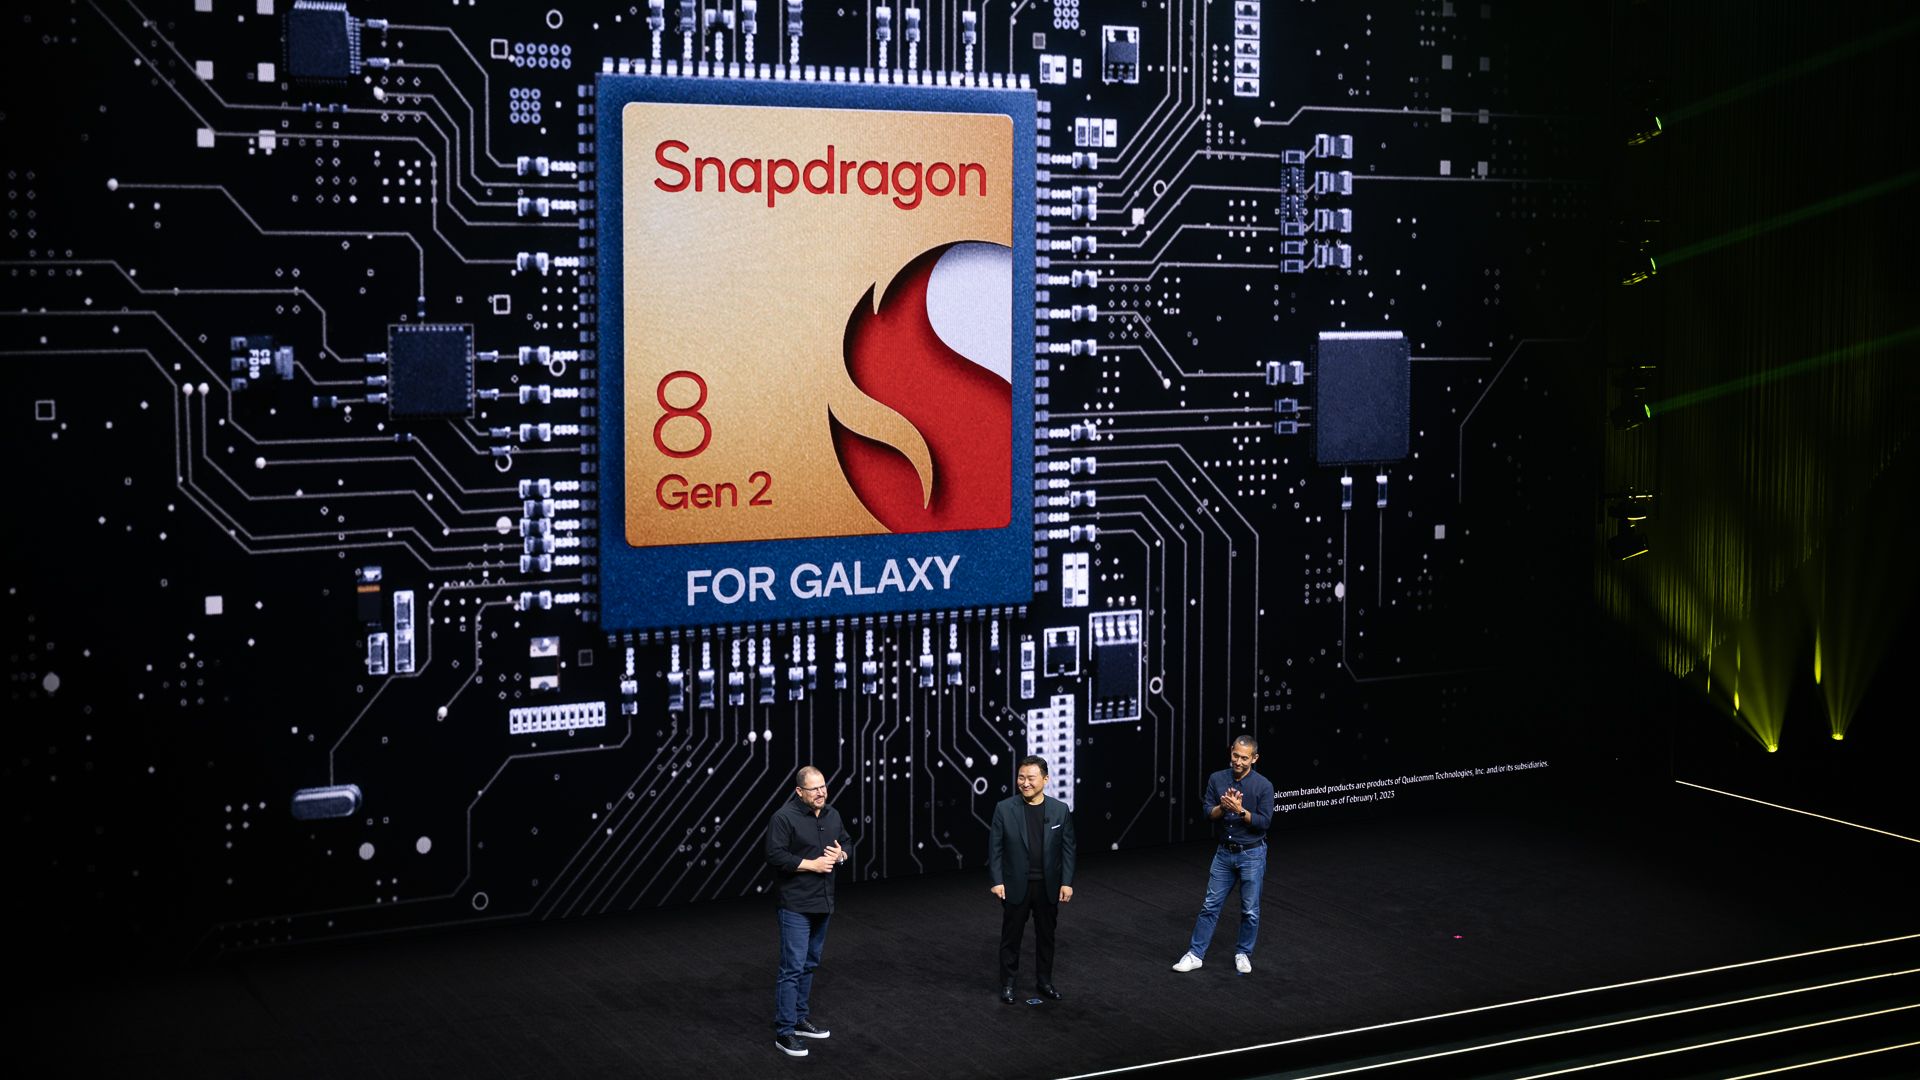 What Is the Snapdragon 8 Gen 2 for Galaxy?